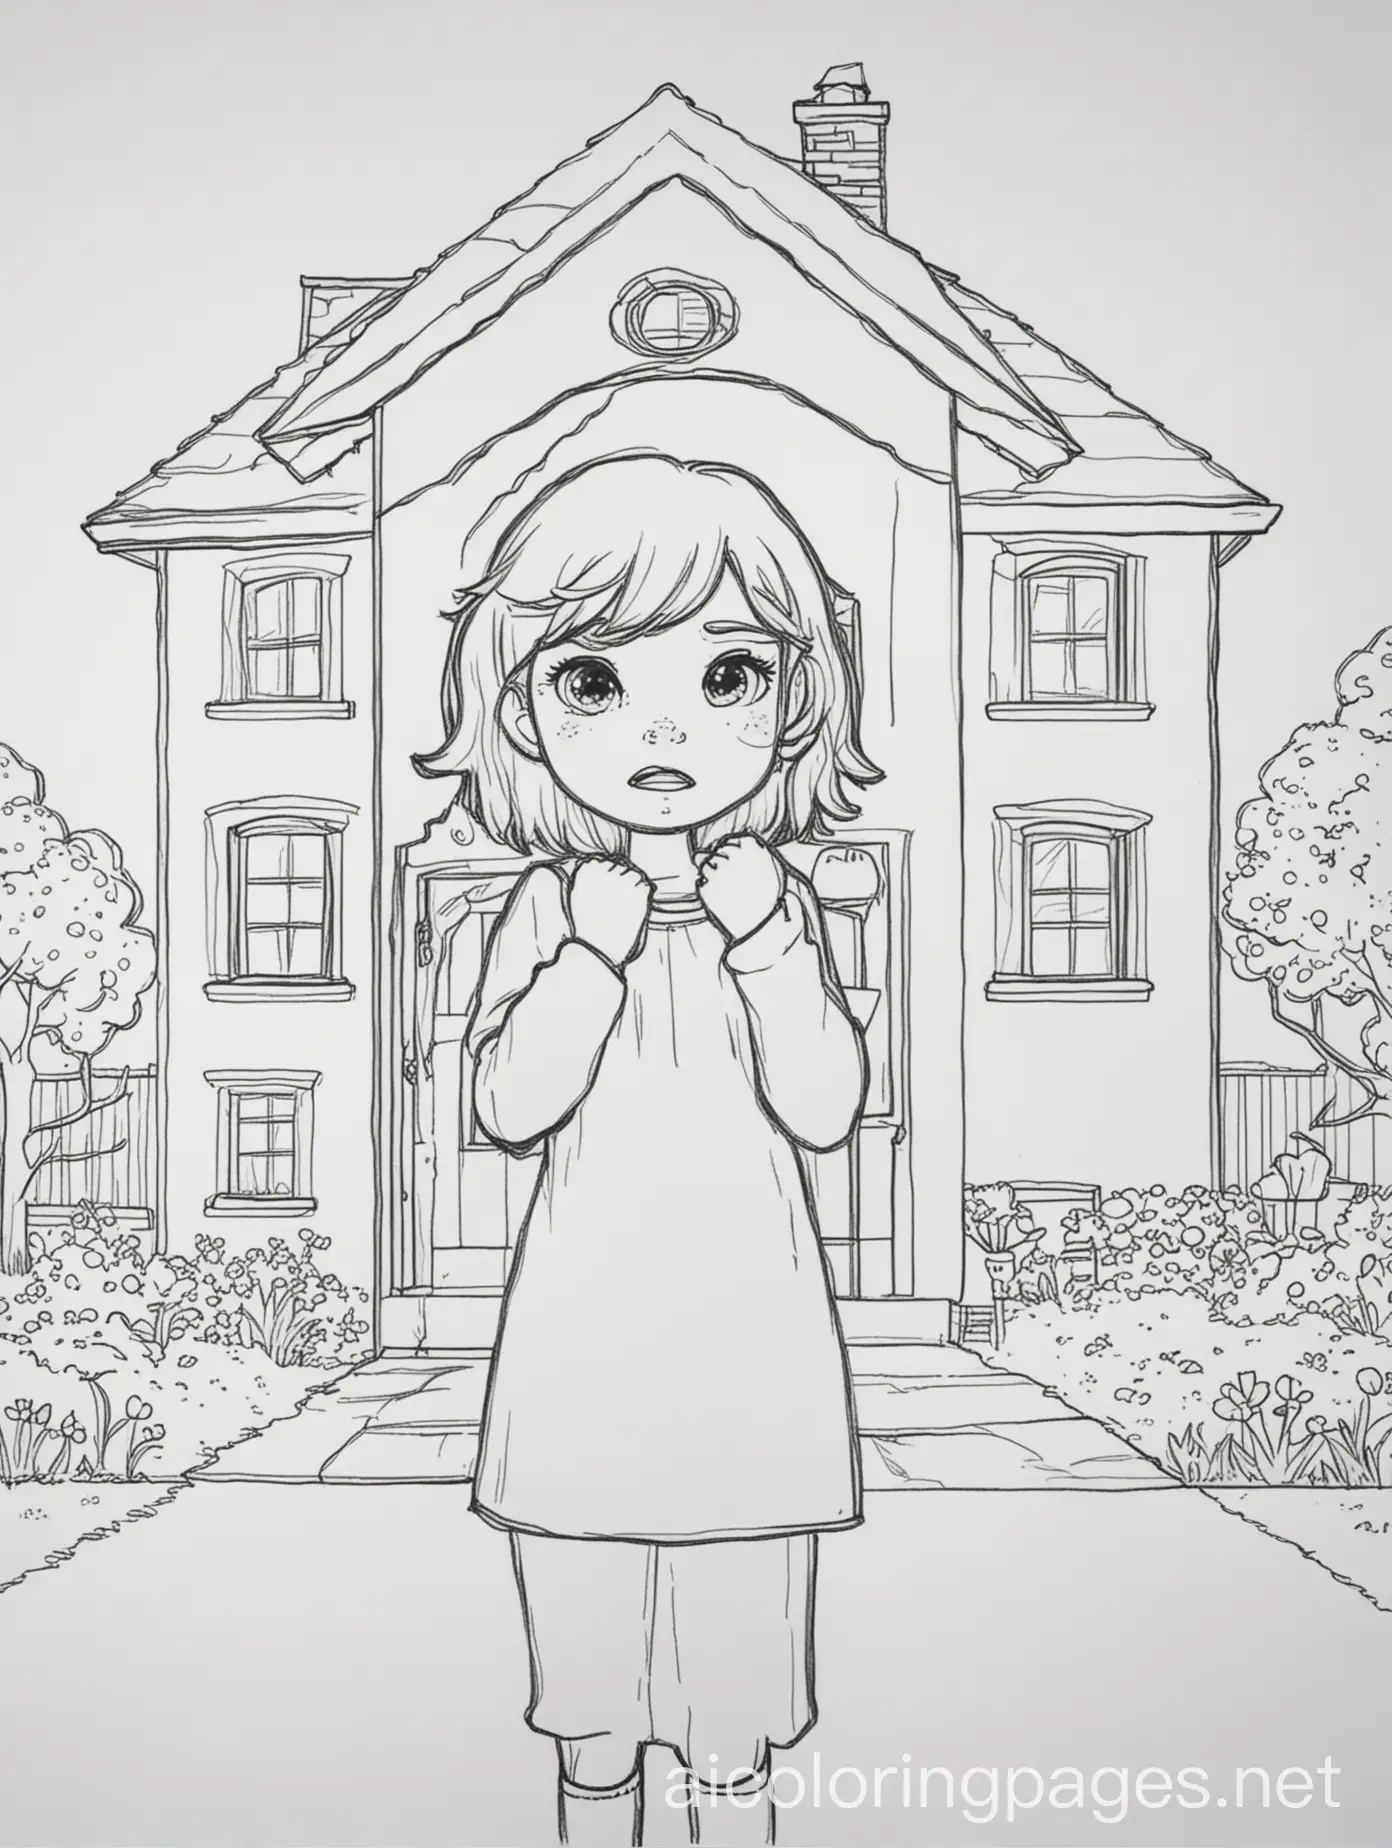 Girl-Crying-with-House-Background-Coloring-Page